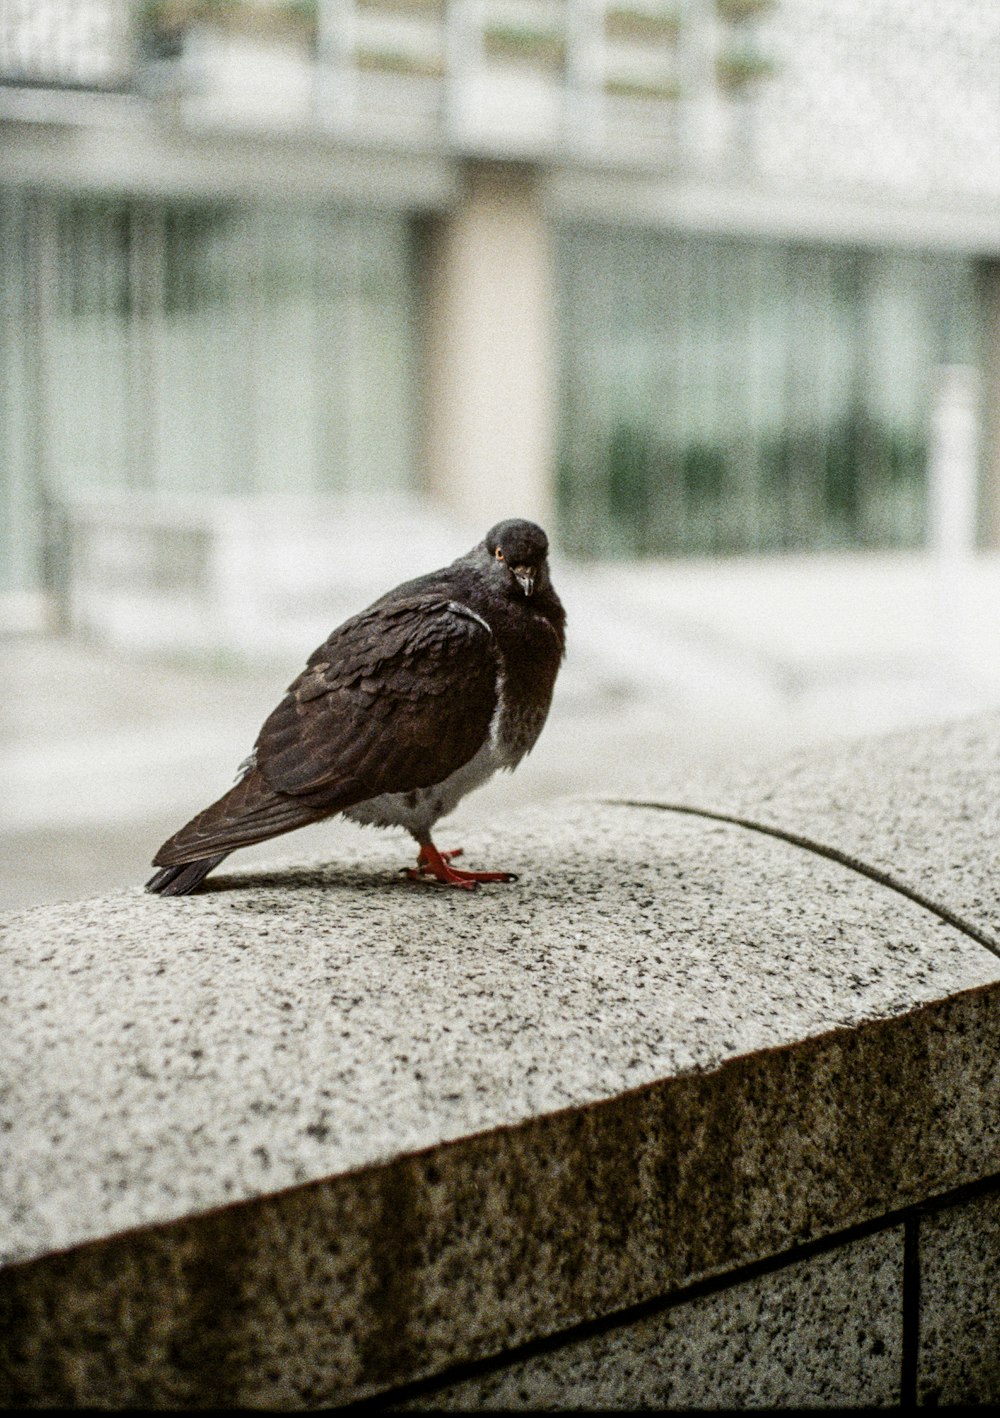 brown bird on gray concrete surface during daytime